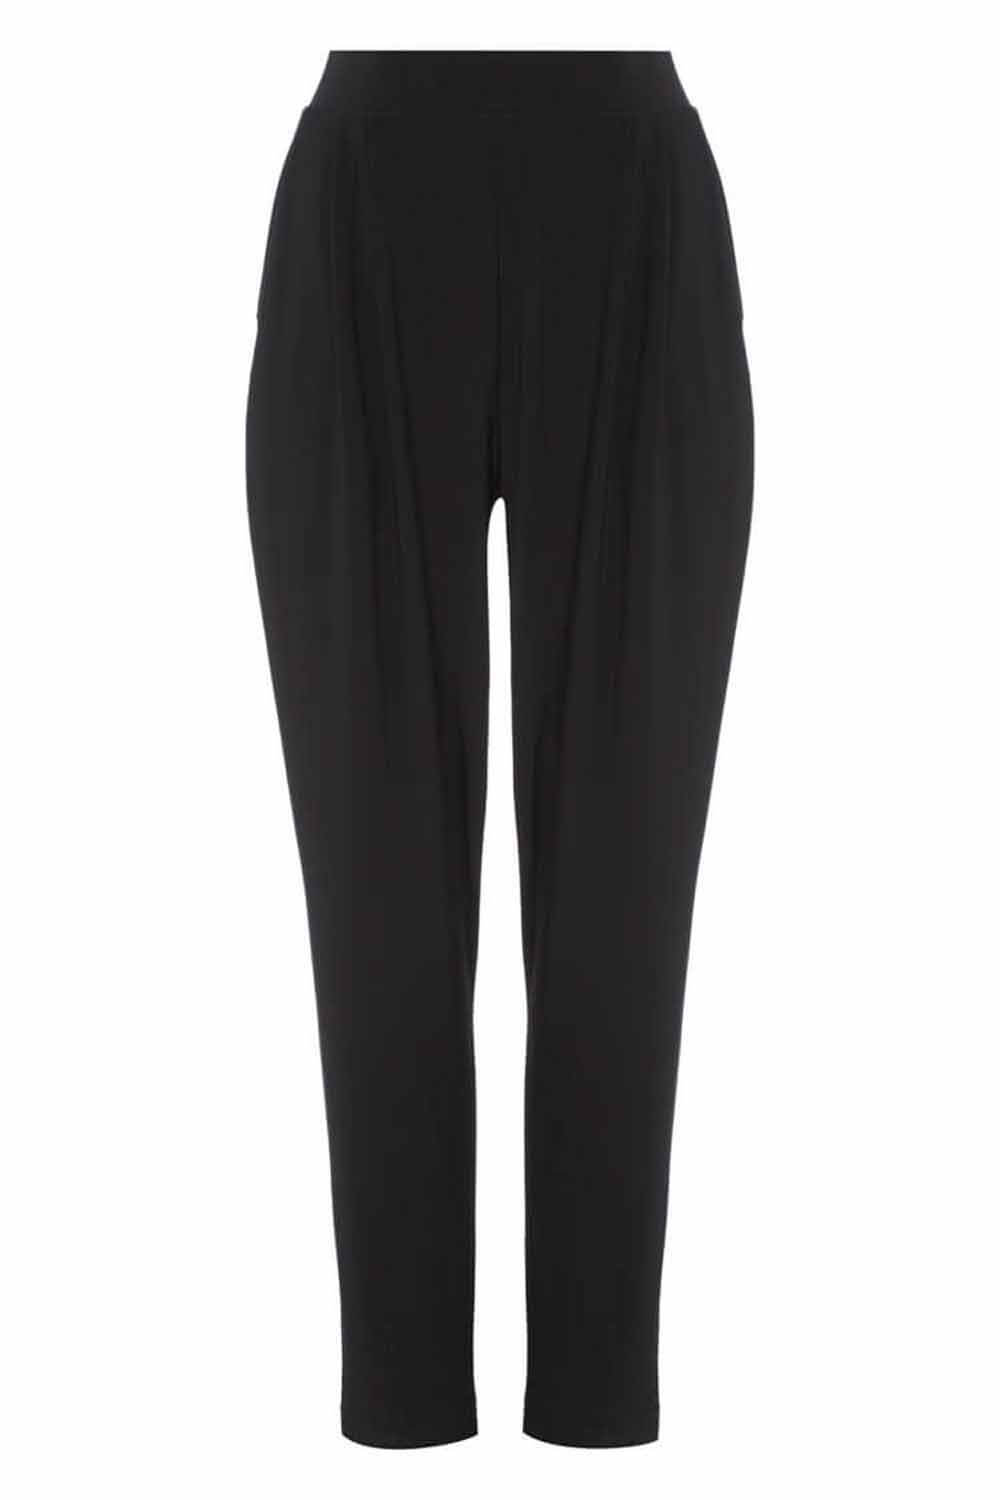 Black Jersey Harem Trousers , Image 4 of 4